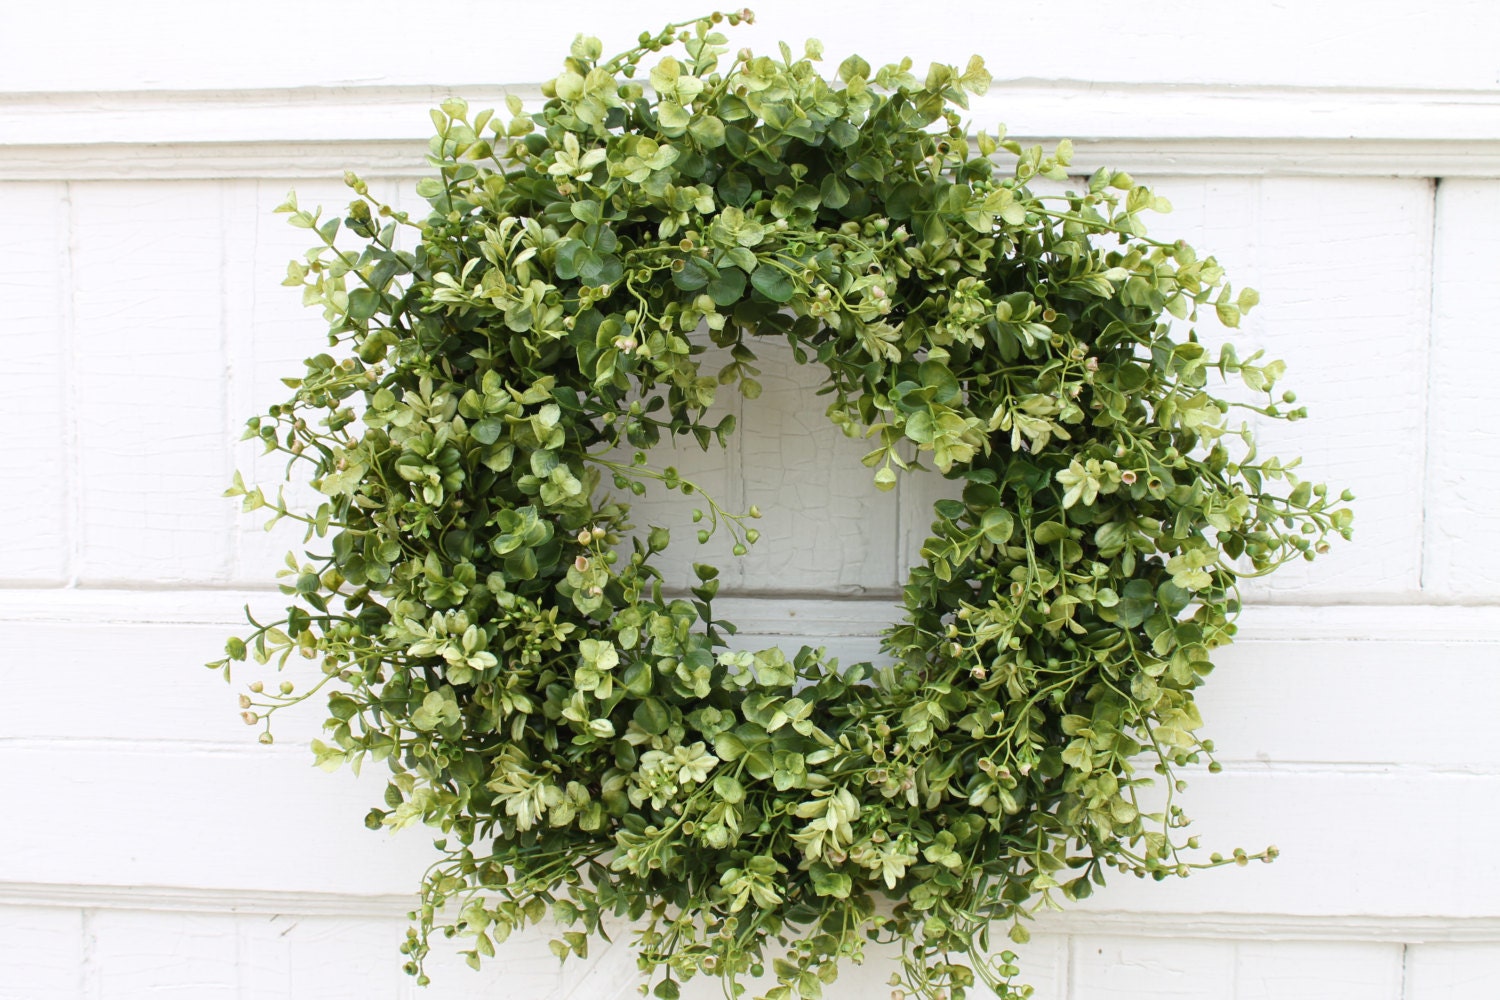 Efavormart 2 Pack | 21 inch Green Artificial Lifelike Boxwood Leaves Spring Wreath for Front Door Decor Boxwood Wreath with Big Berries, Farmhouse